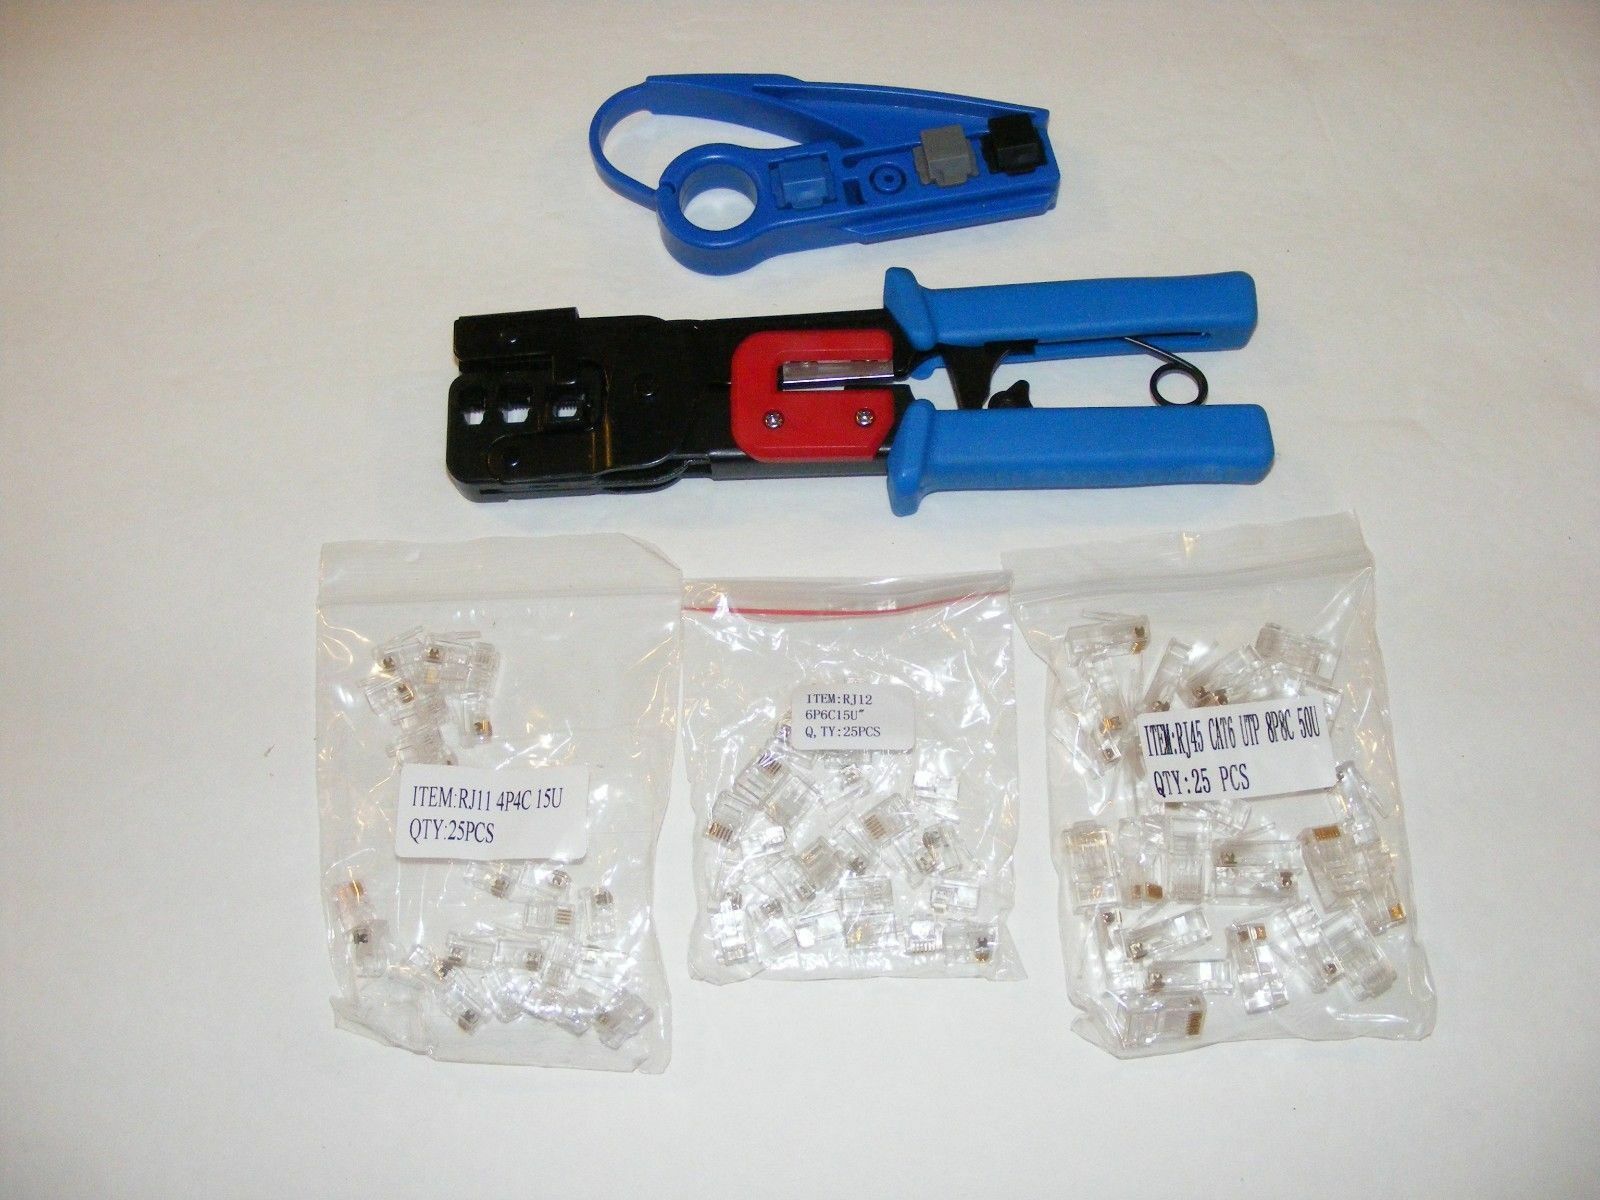 Rj10, Rj11, Rj45 Phone Wire Crimper Tool Ideal For Patch Cords